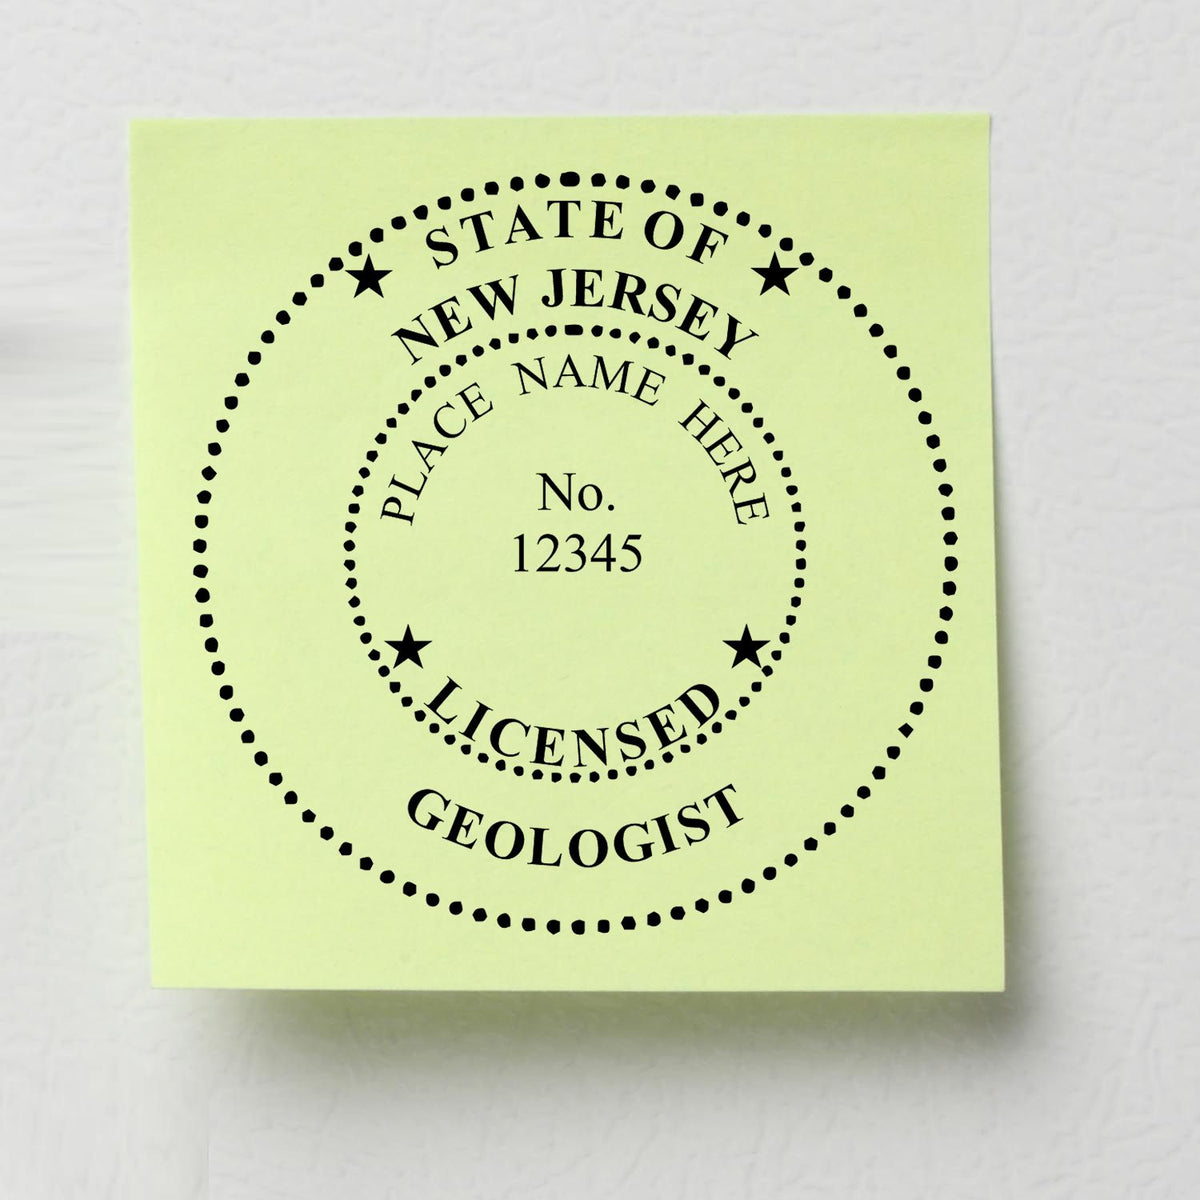 This paper is stamped with a sample imprint of the Premium MaxLight Pre-Inked New Jersey Geology Stamp, signifying its quality and reliability.